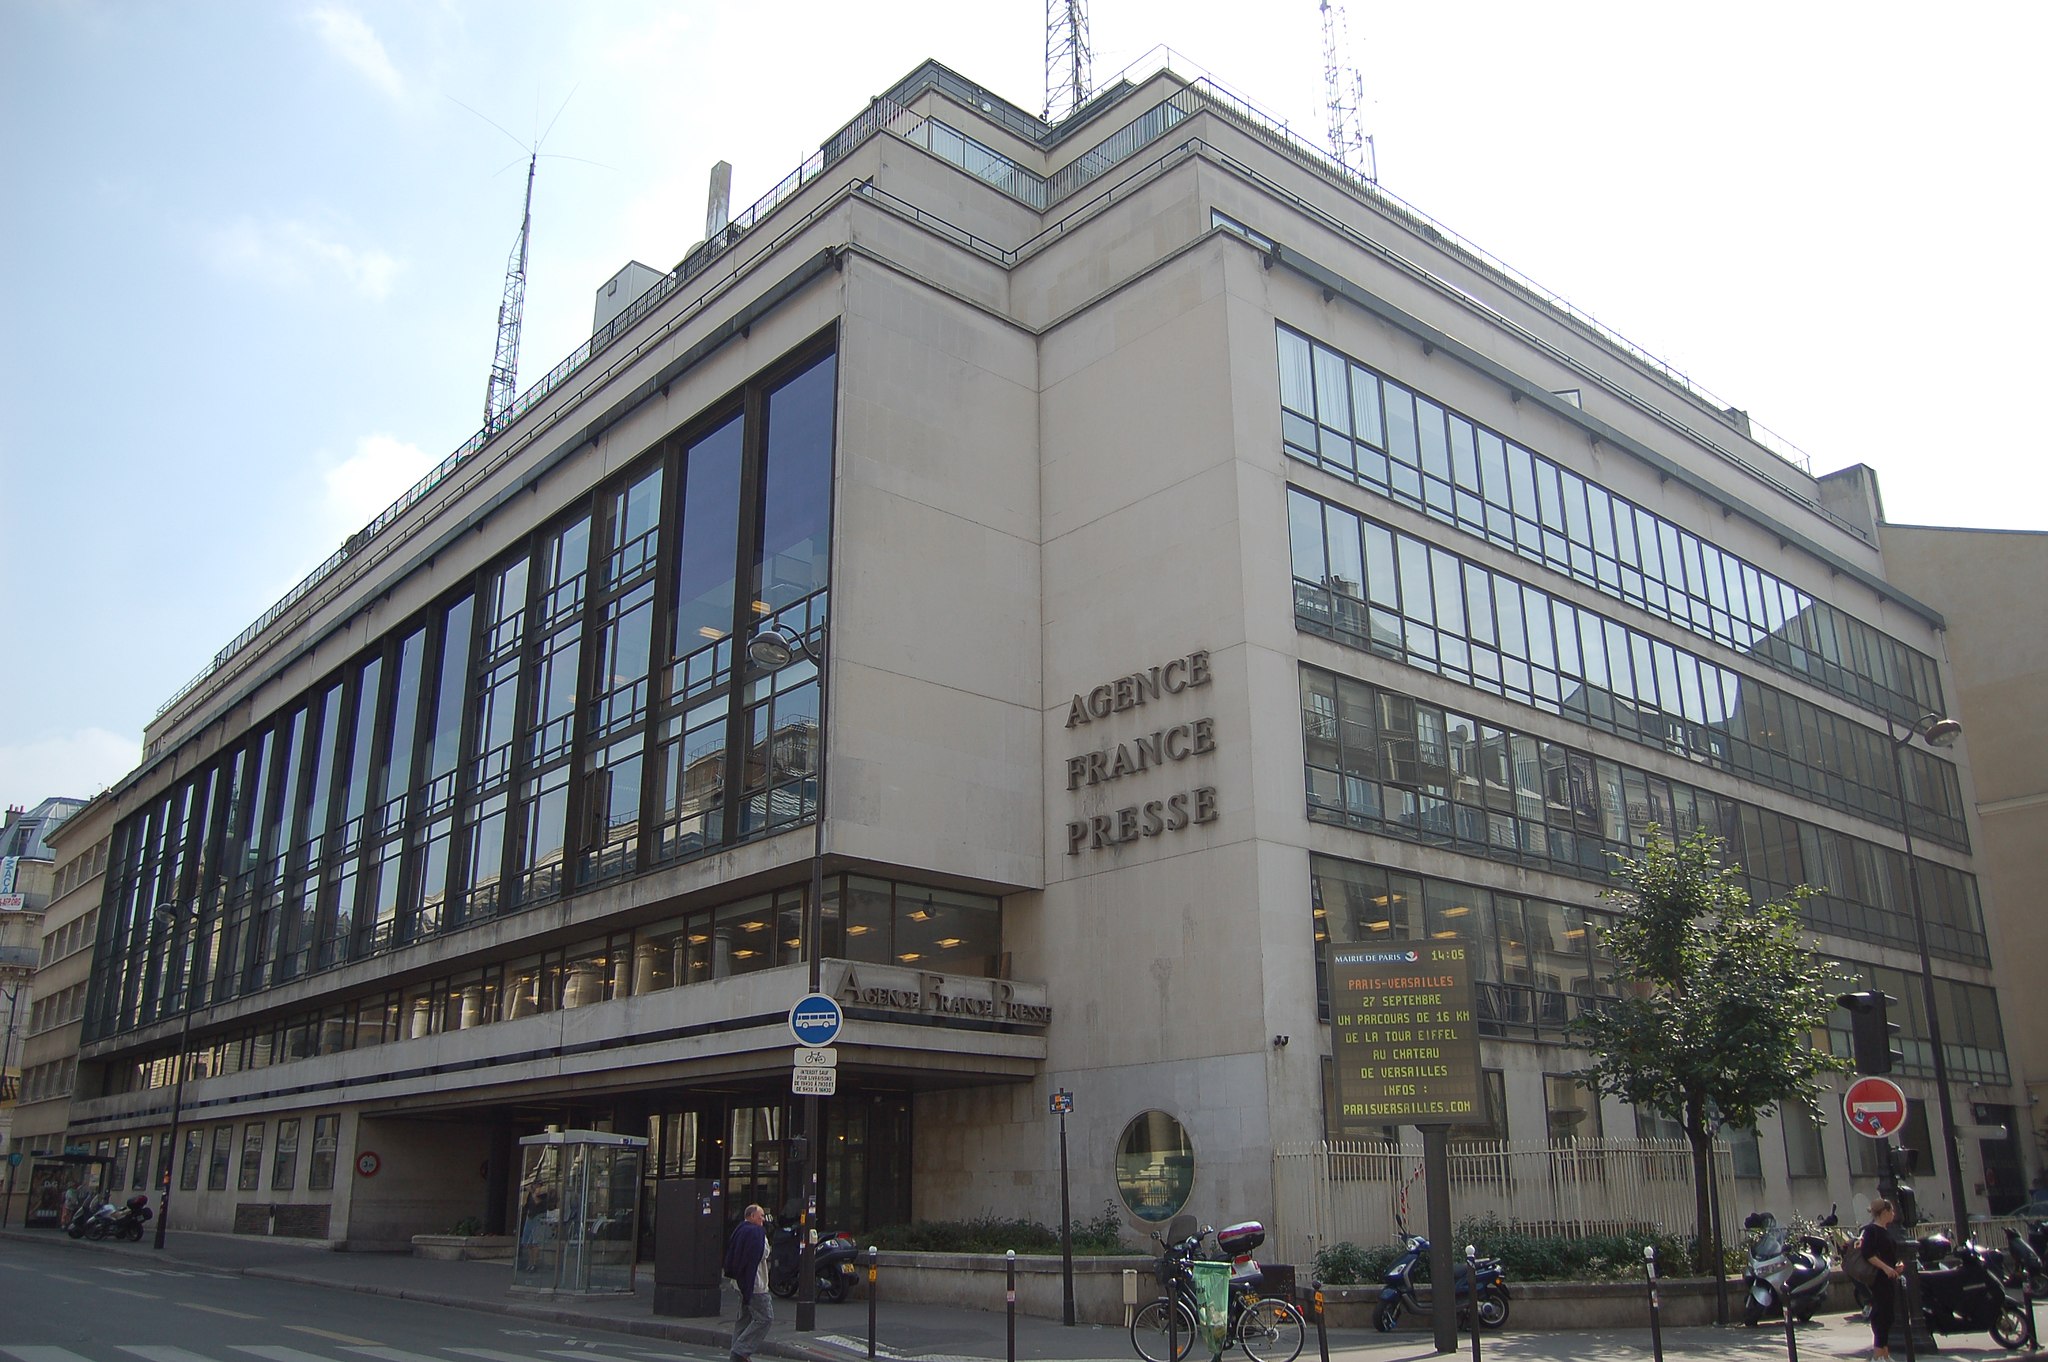 The Agence France-Presse headquarters building in downtown Paris